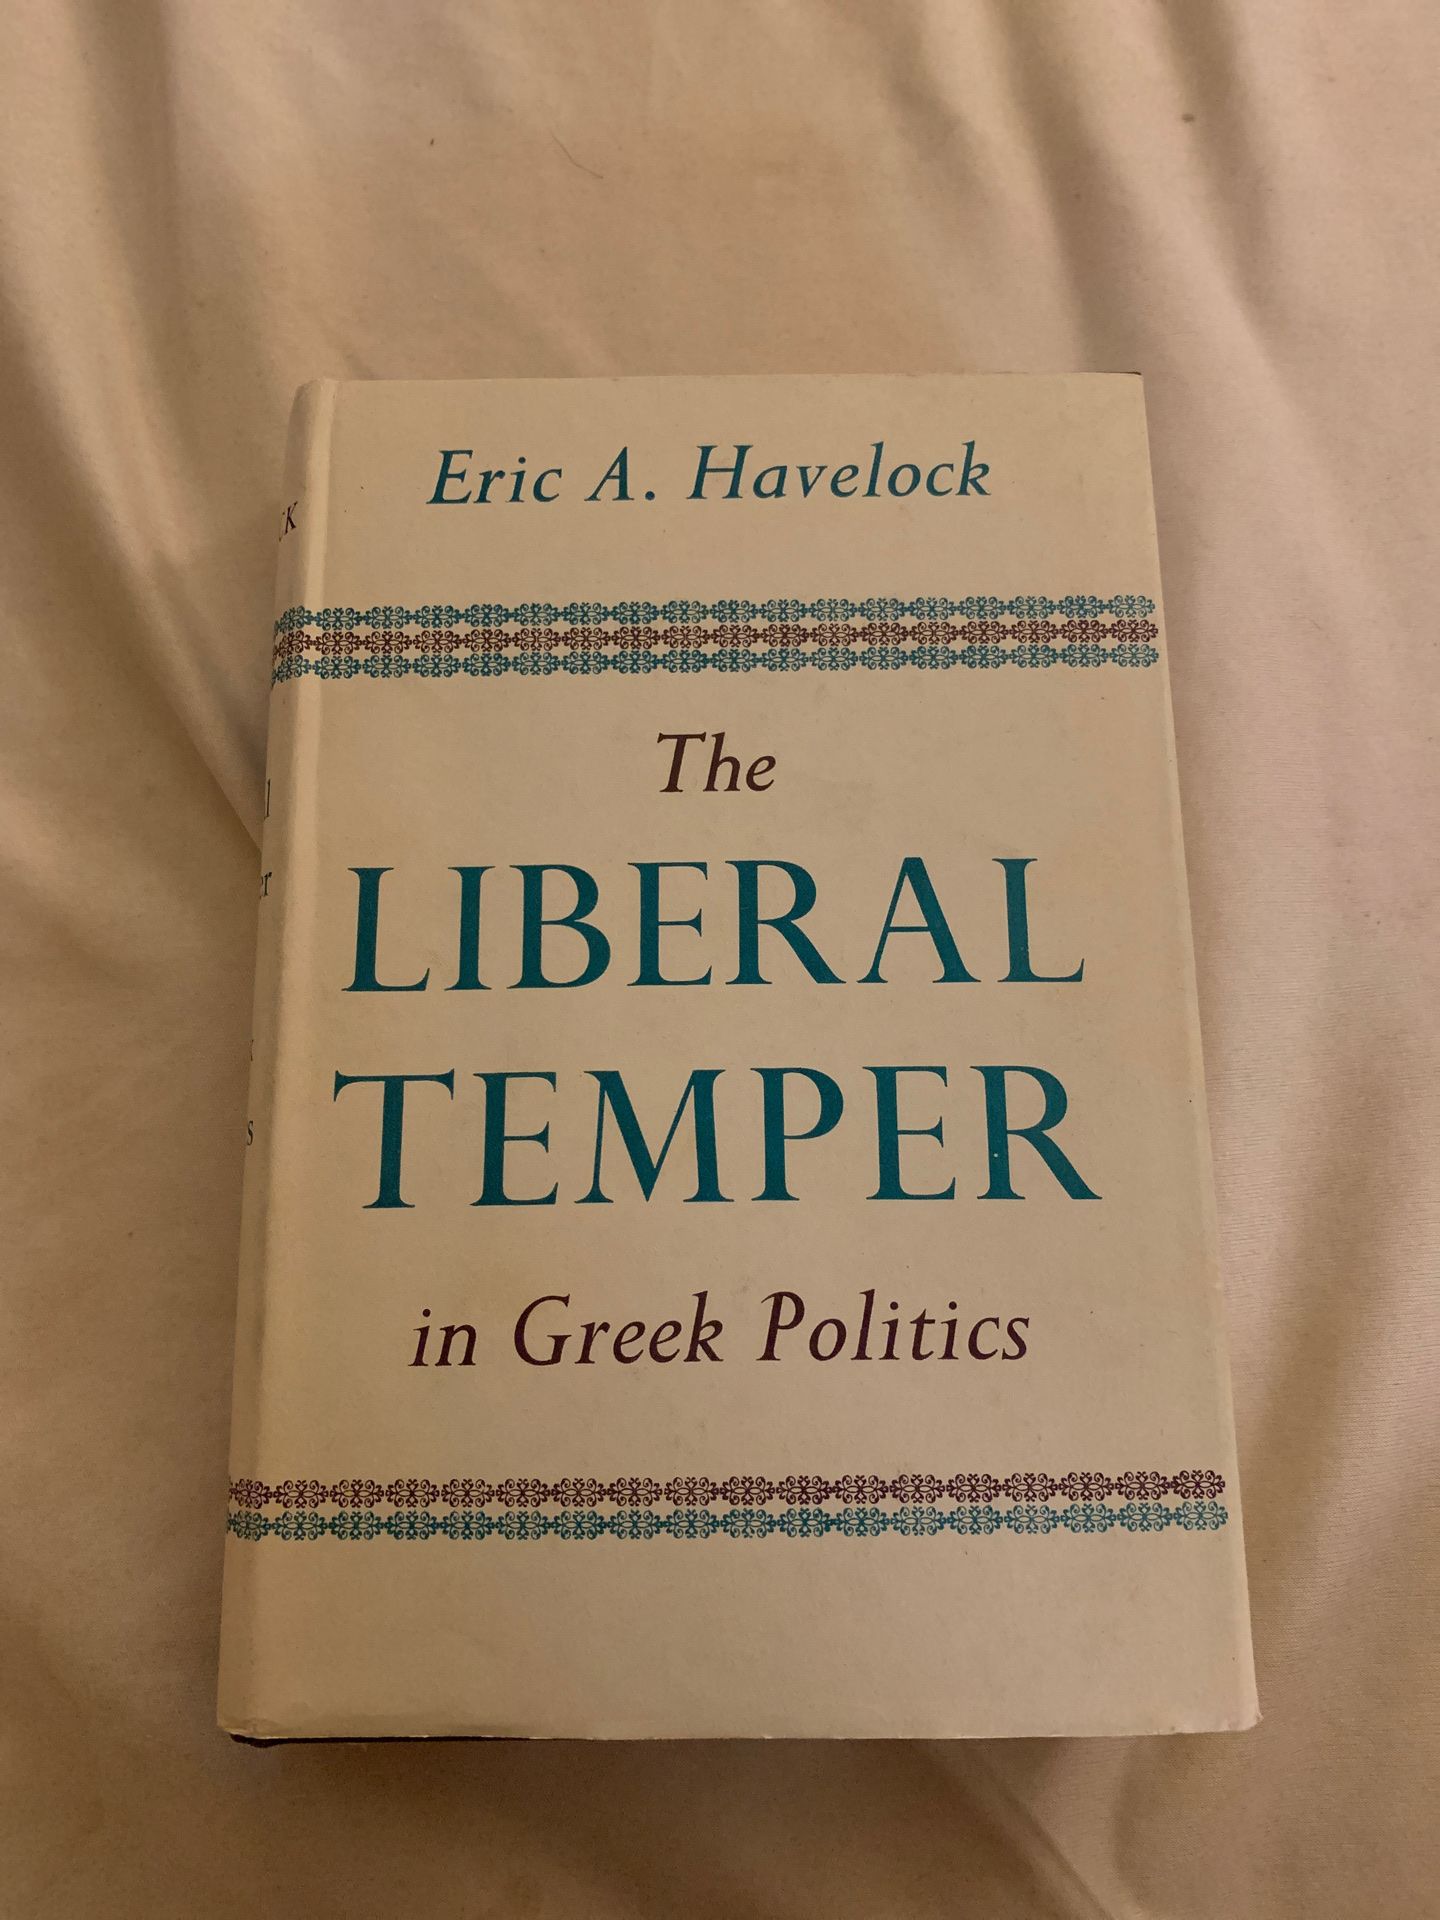 The Liberal Temper in Greek Politics by Eric A. Havelock- Printed 1957 London